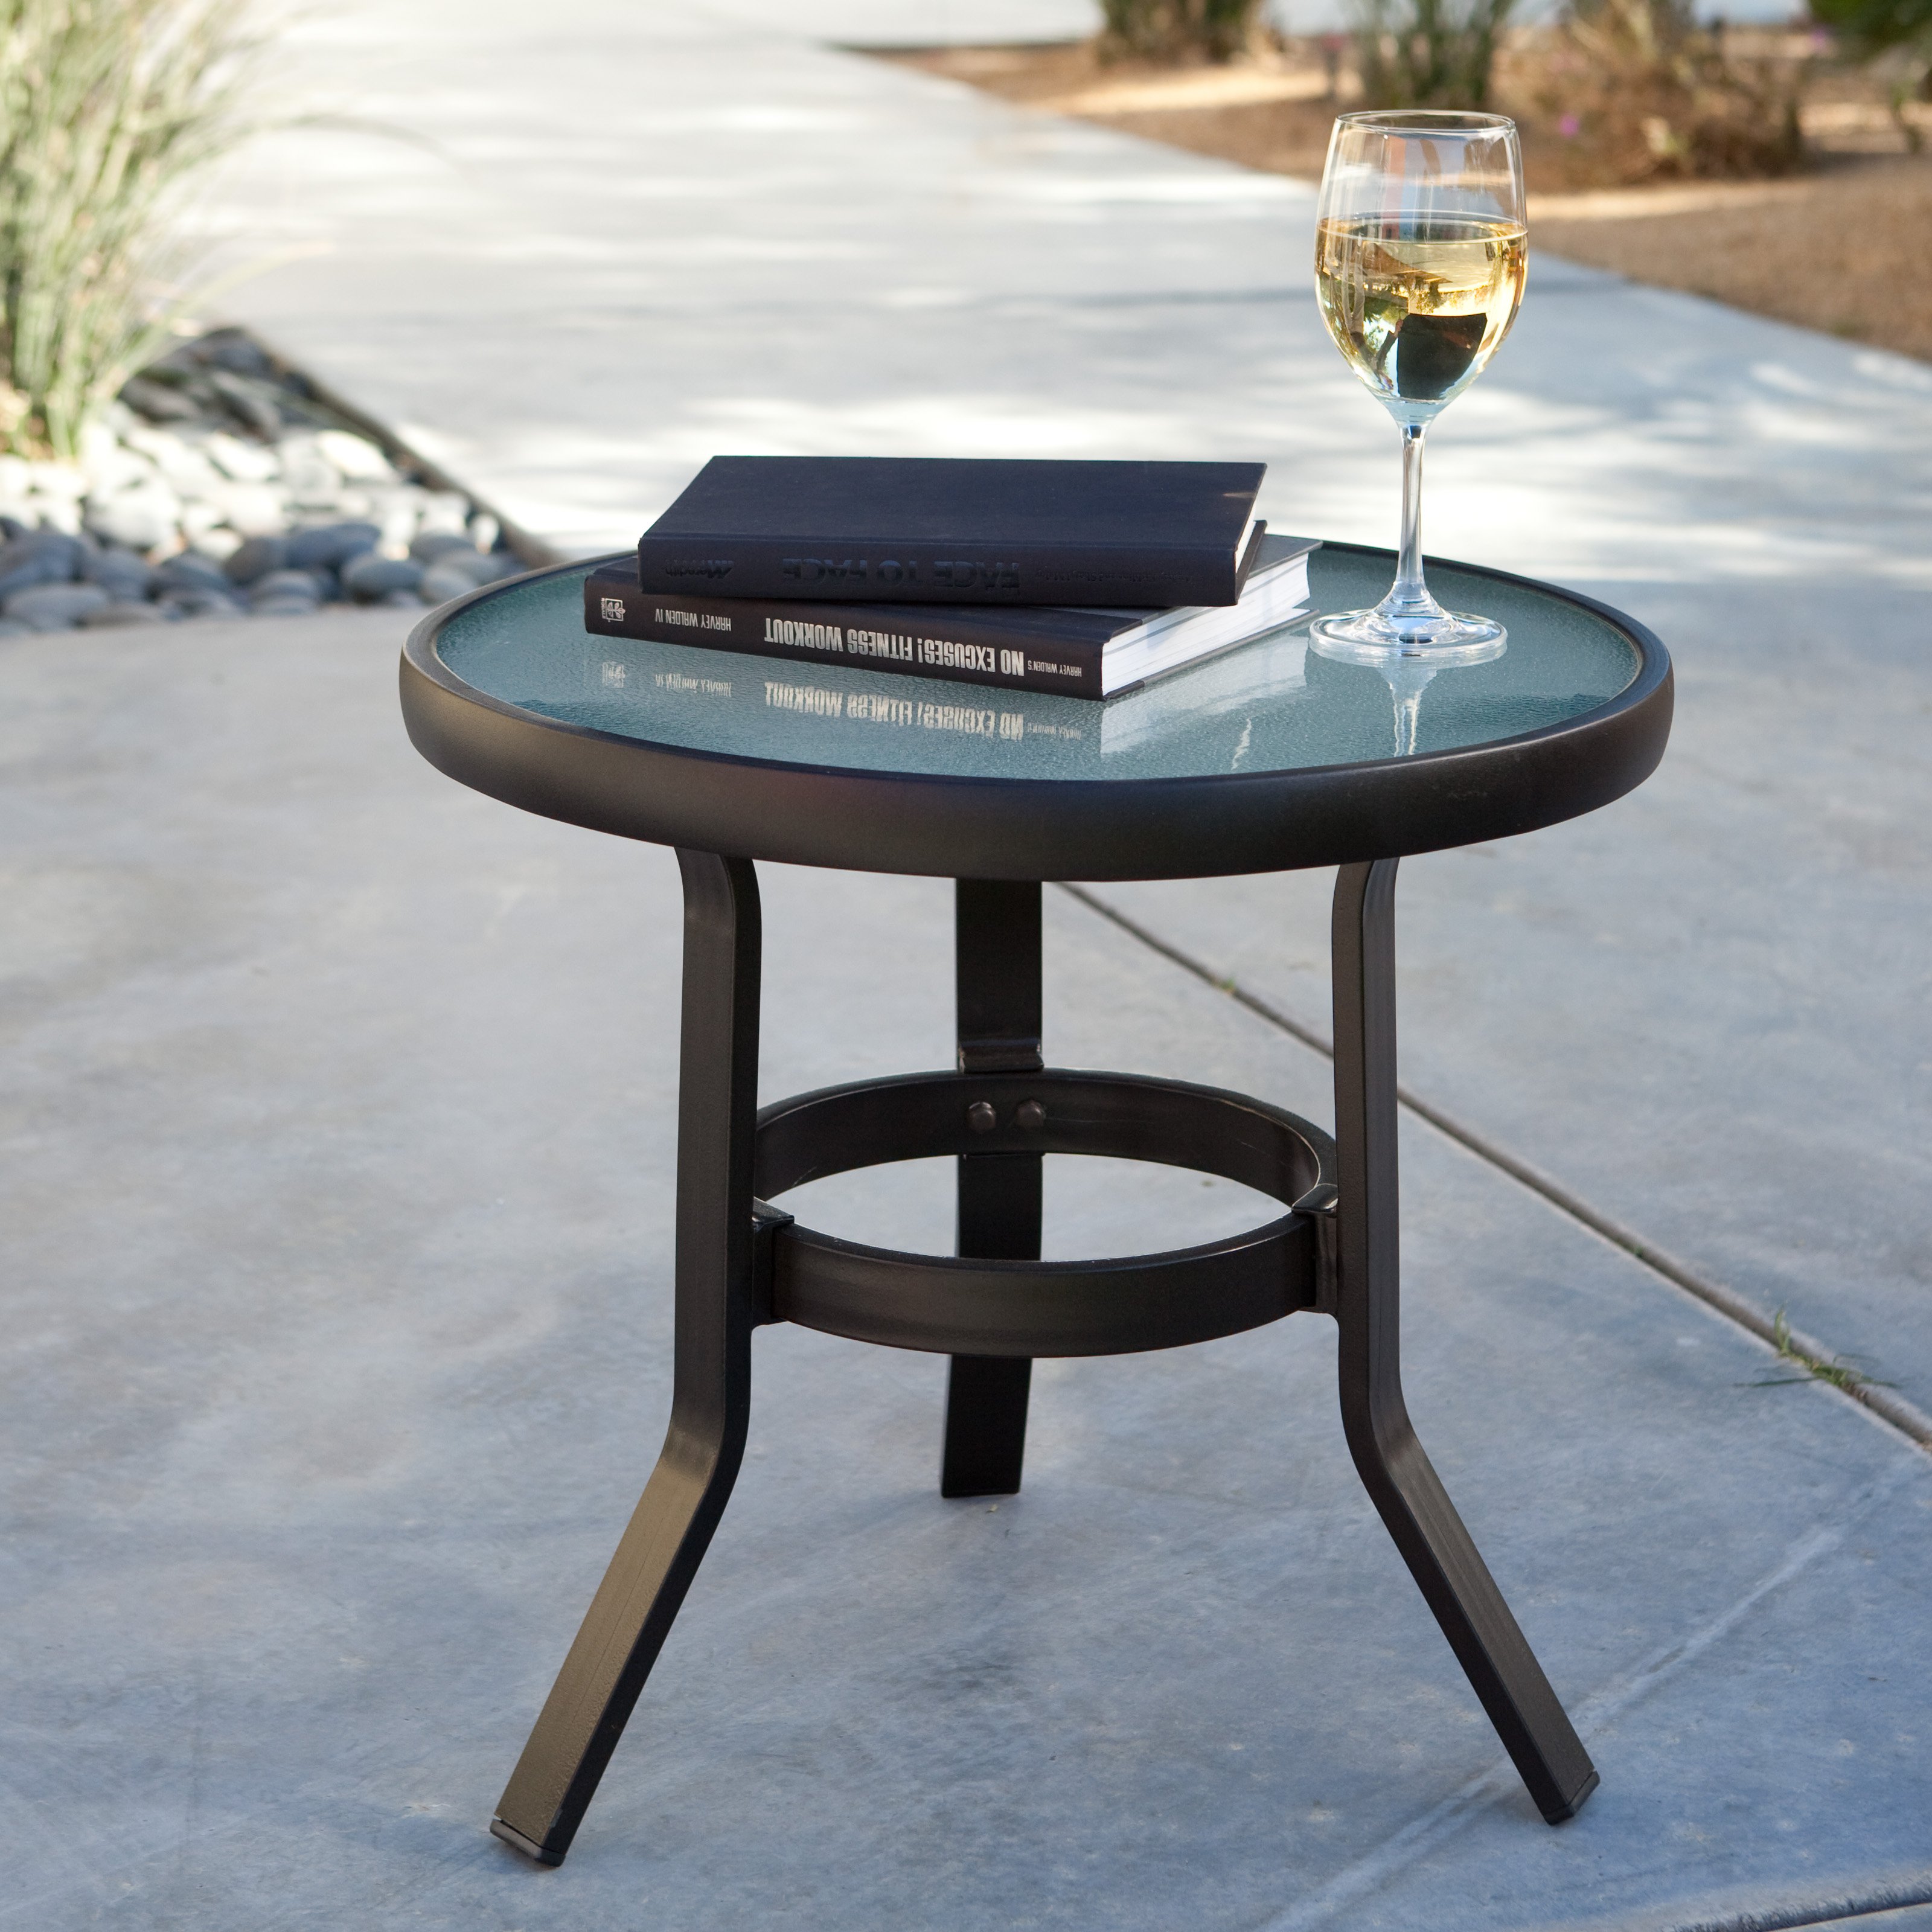 coral coast patio side table accent tables unfinished glass target outdoor teal home accessories dining room chair styles small white round bookshelf yellow sofa black metal end